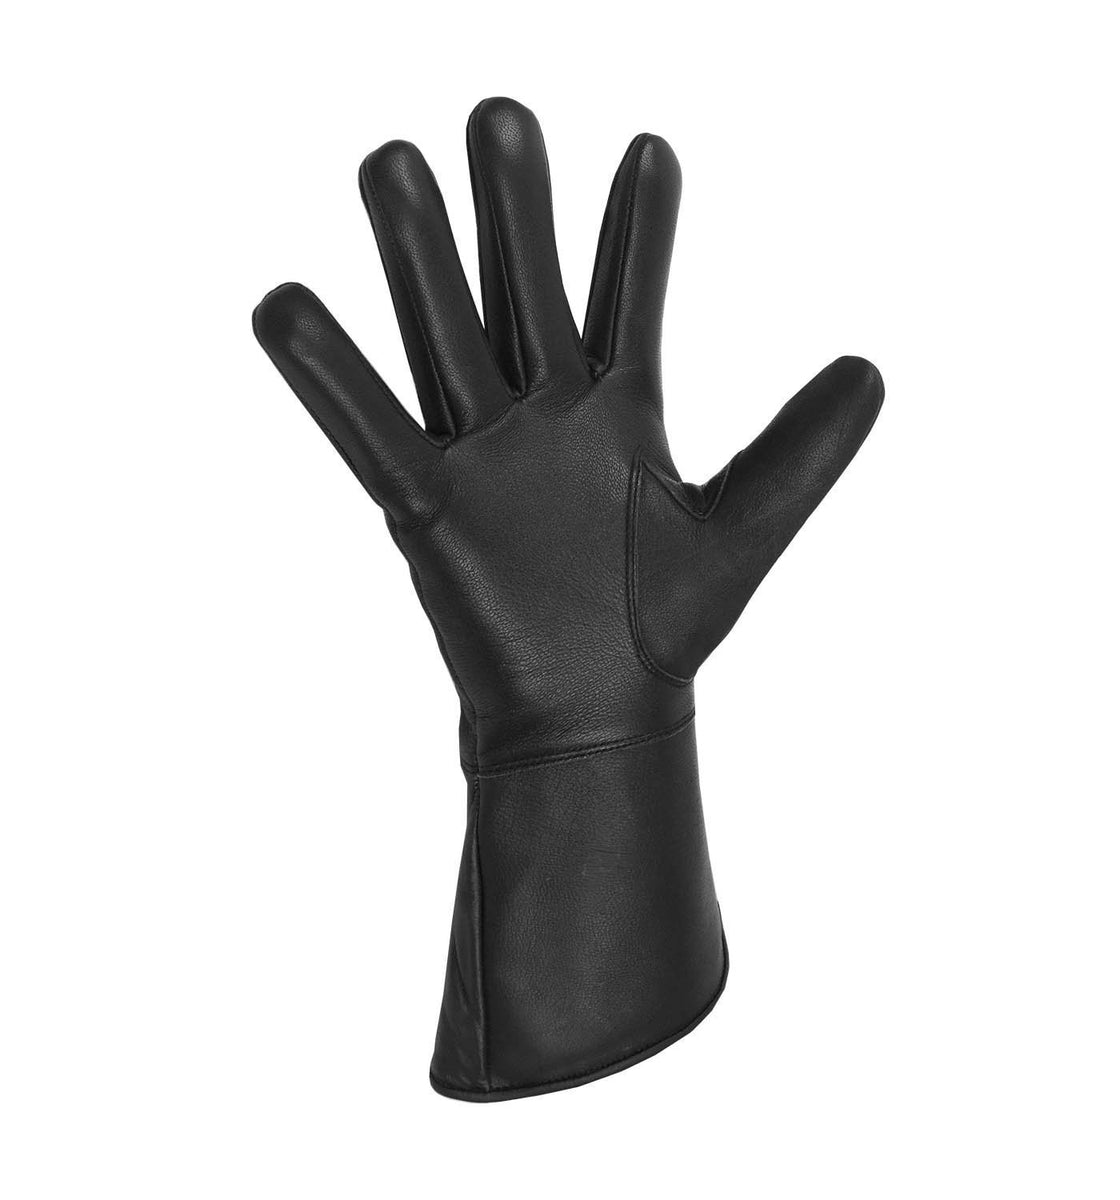 soft leather gloves